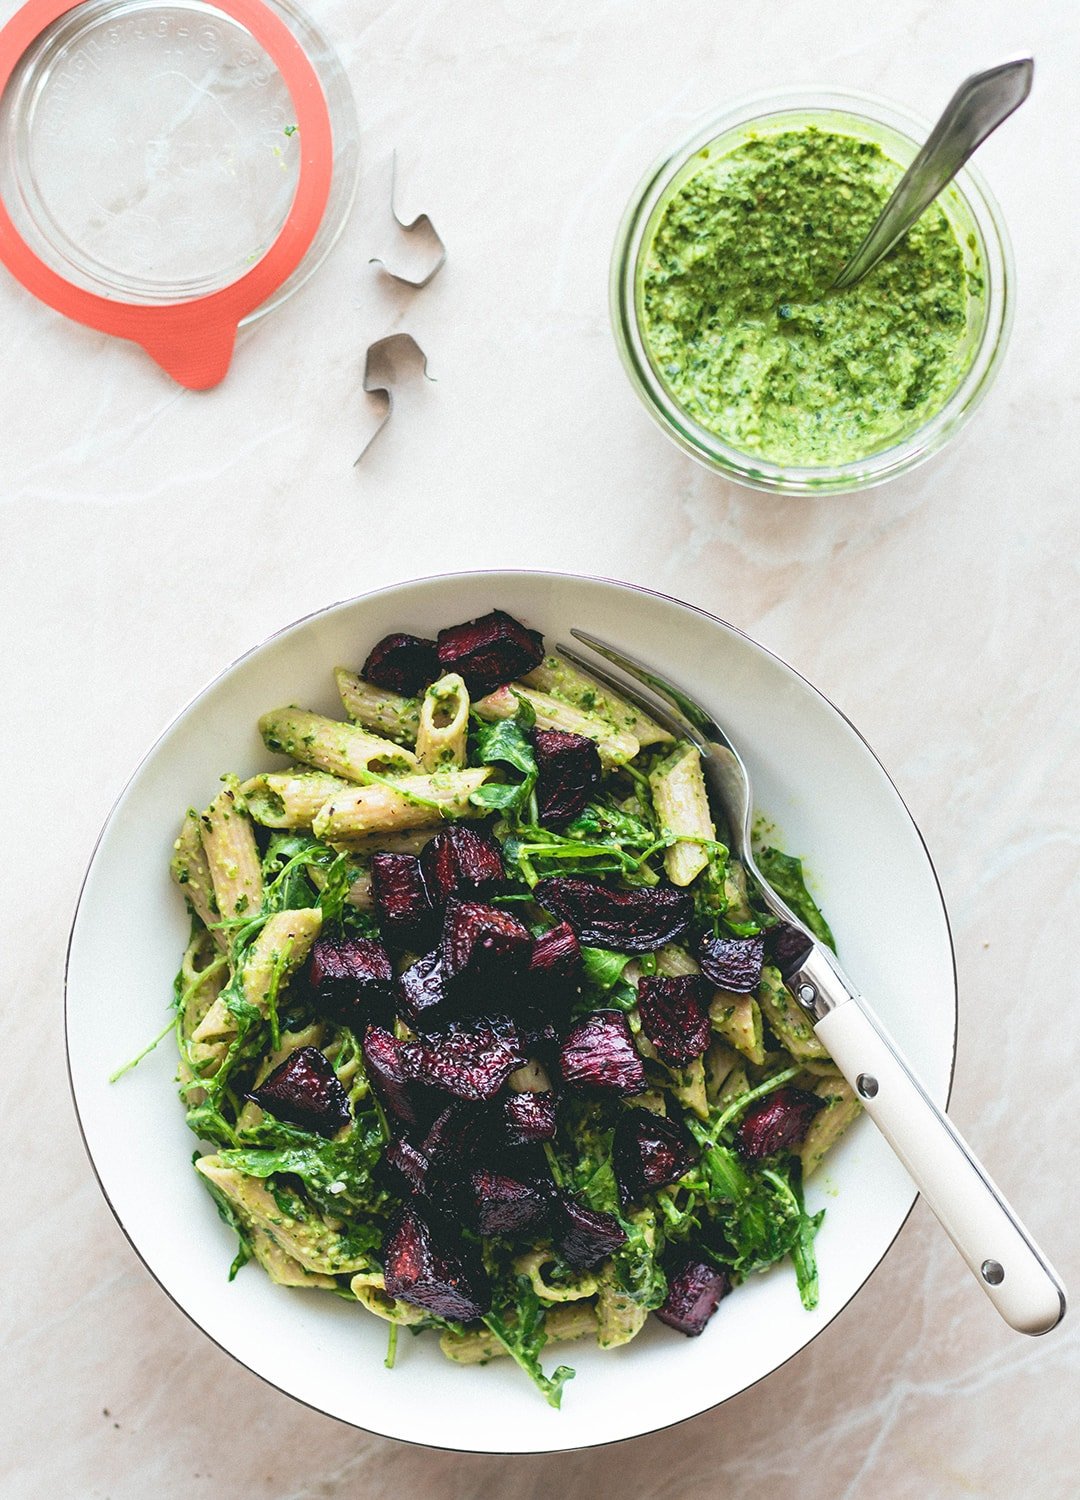 Arugula Basil Pesto Pasta (vegan, gf) - delicious garden pesto served with gluten-free brown rice pasta and easy to make roasted beets. Delicious and easy pasta recipe! | thehealthfulideas.com